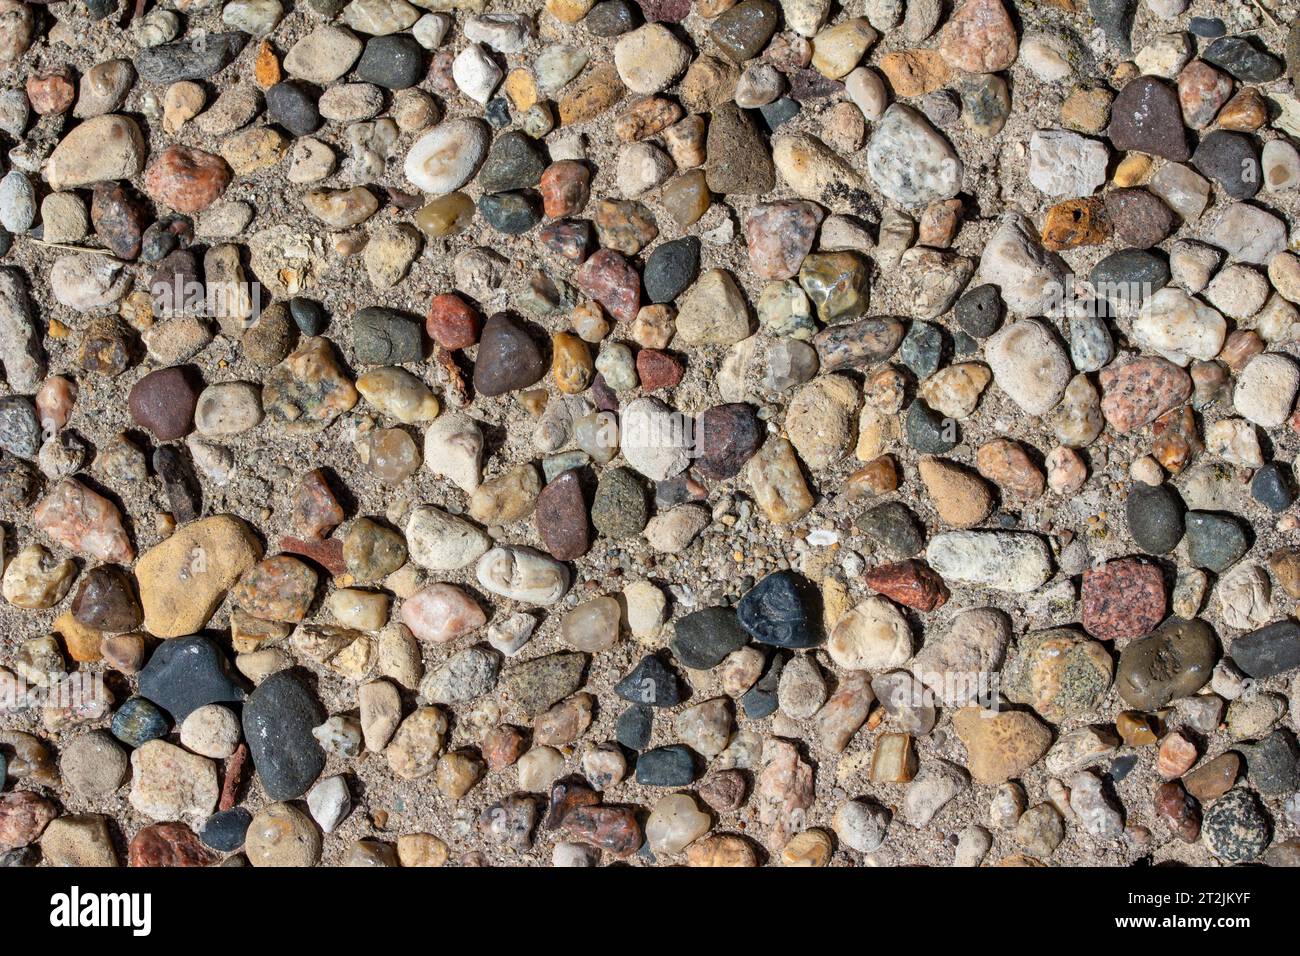 Full frame abstract macro texture background of an old aggregate walking surface with exposed stones and pebbles in bright sunlight Stock Photo